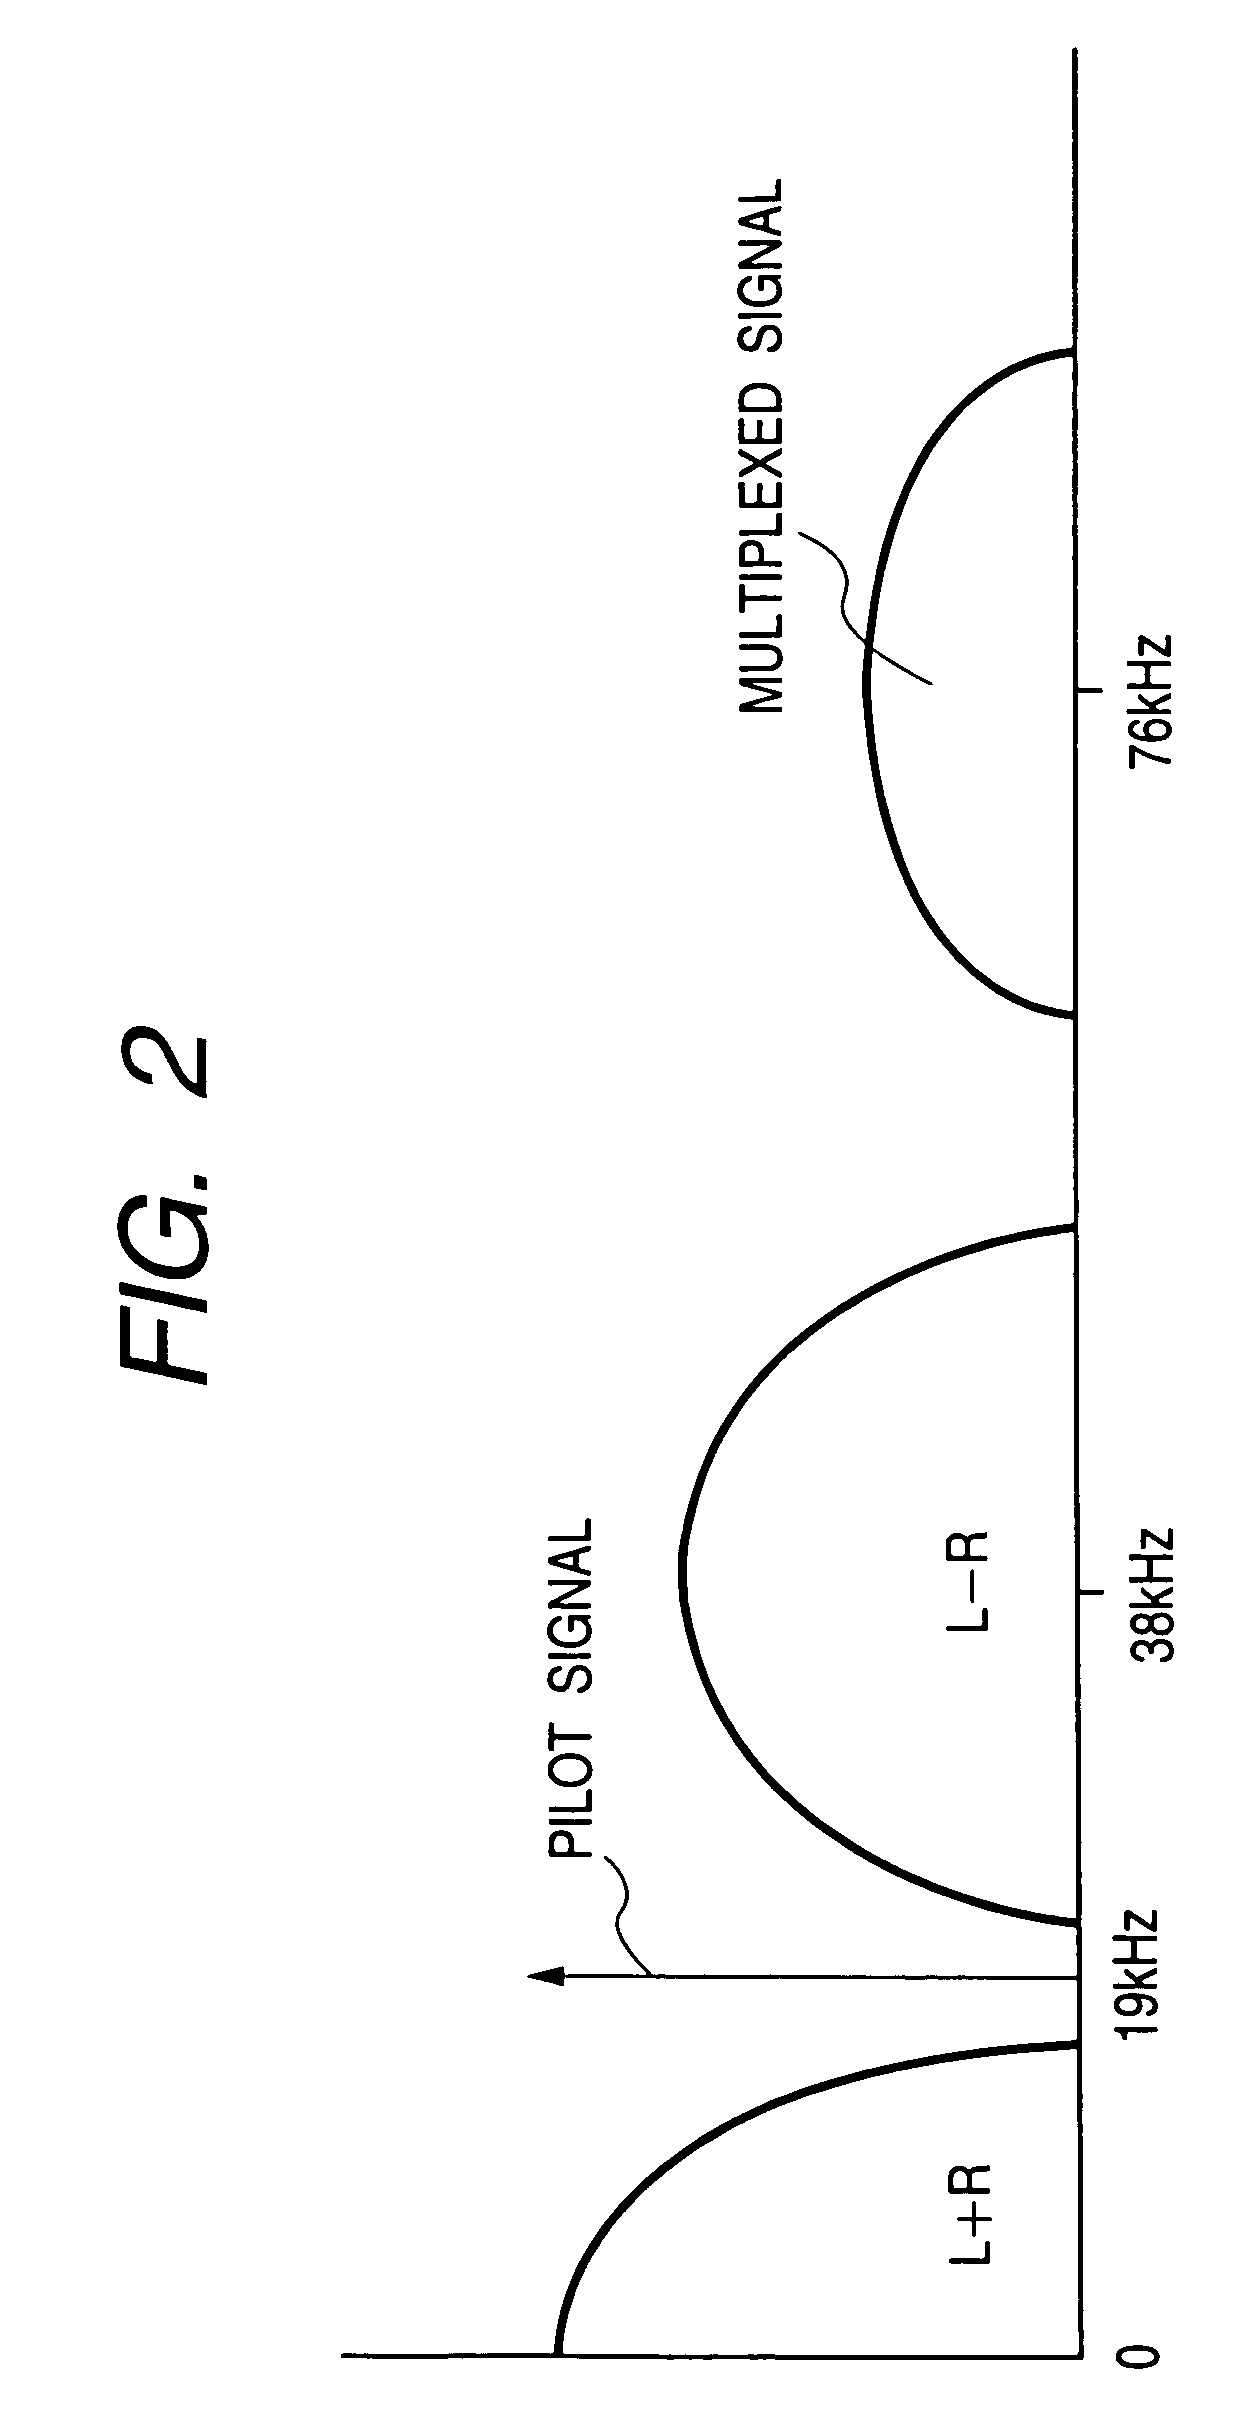 Information processing apparatus for and method of transmitting and/or receiving broadcast signal